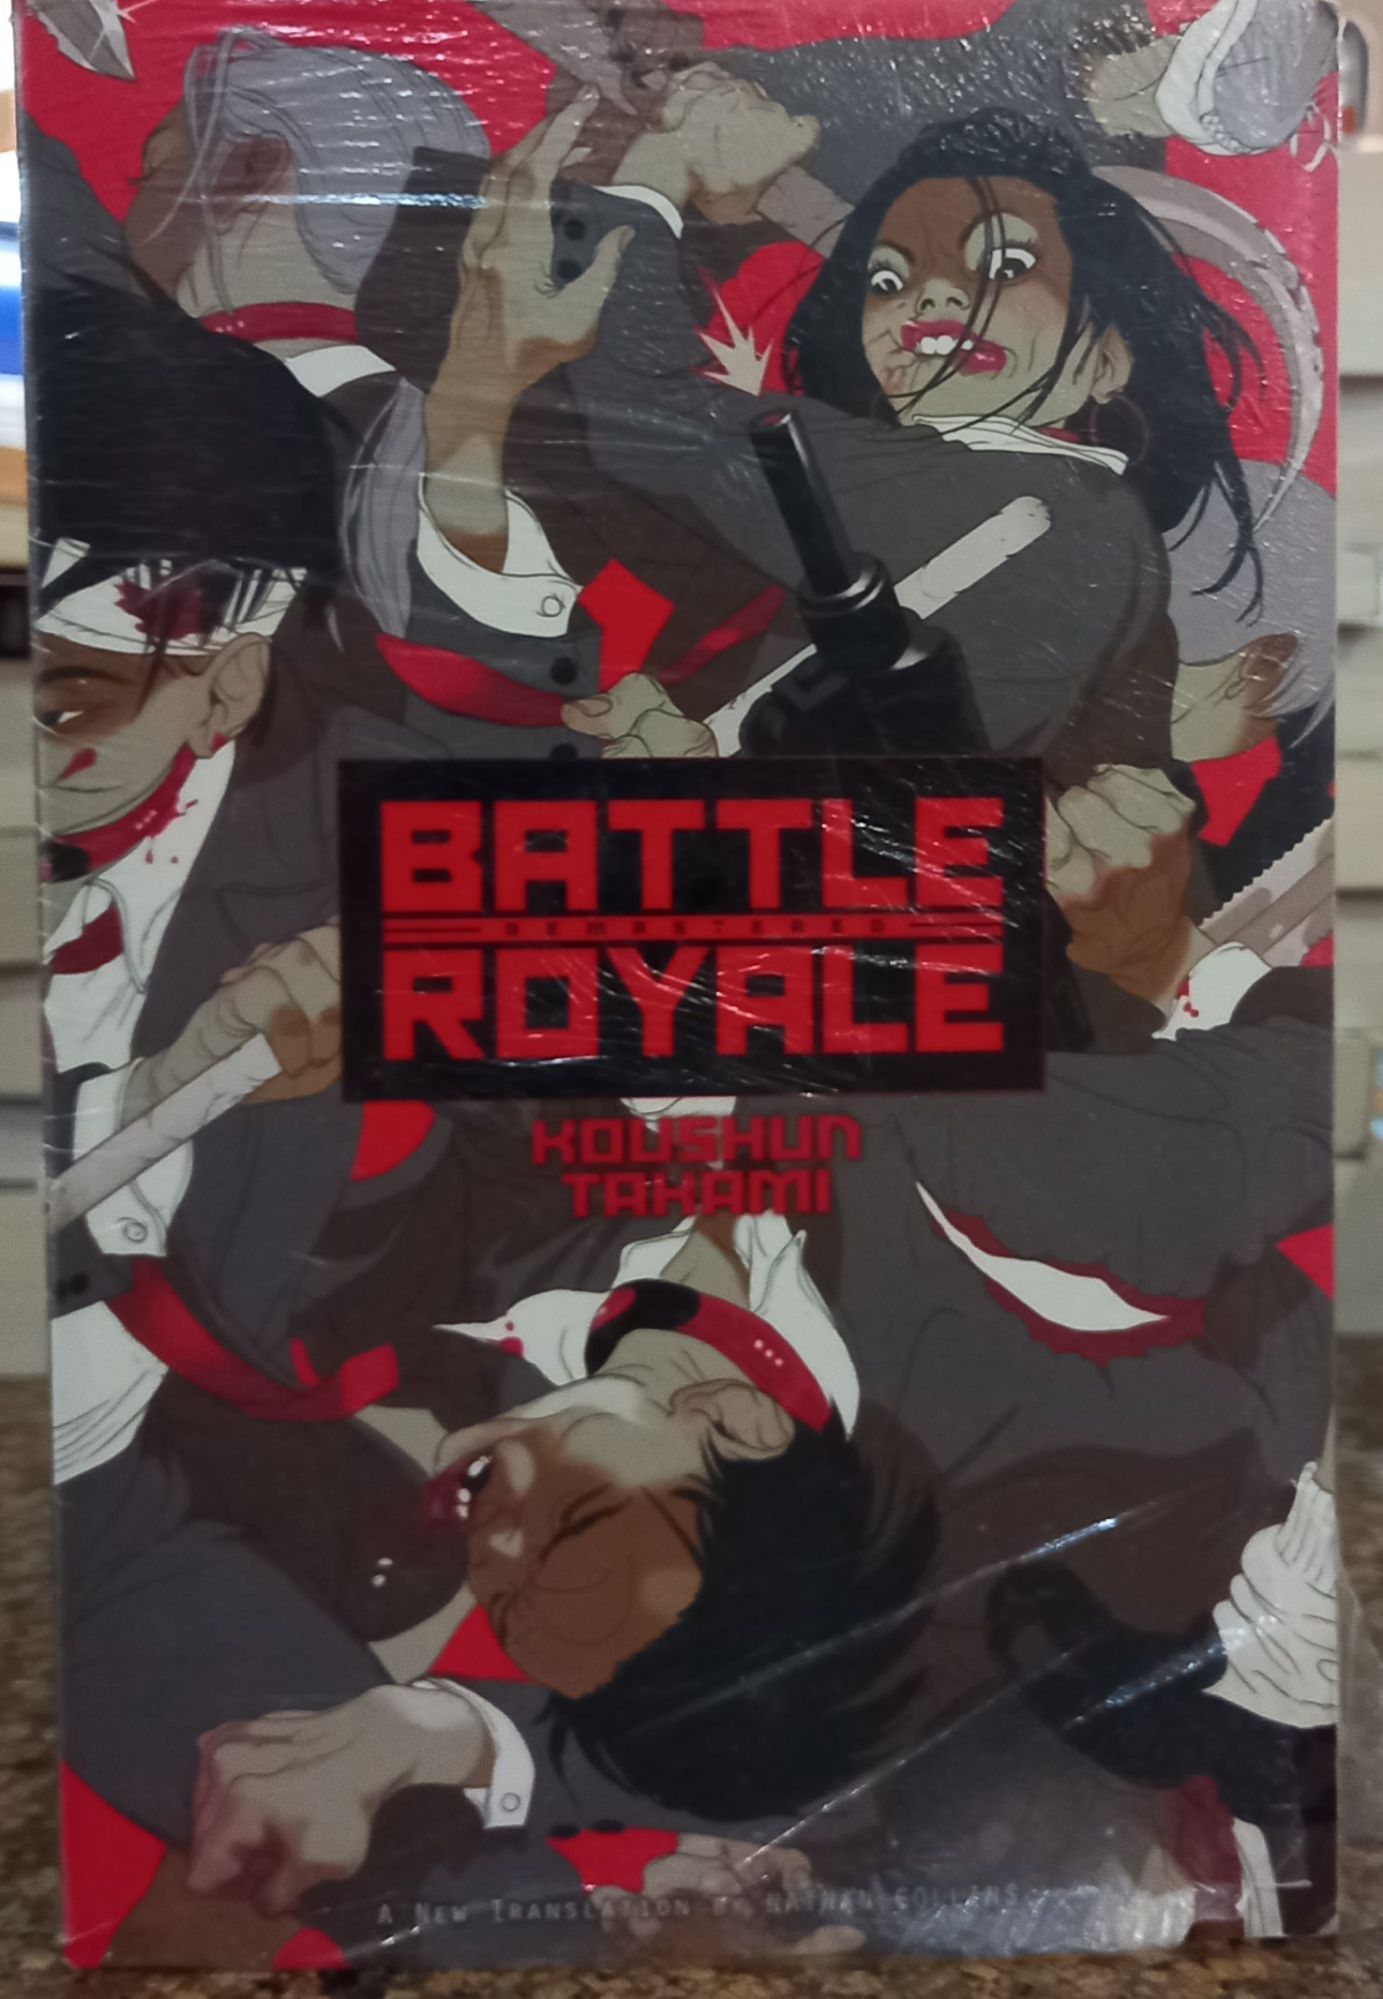 Ten Animes With Battle Royale Fashion In Its Story | Dunia Games